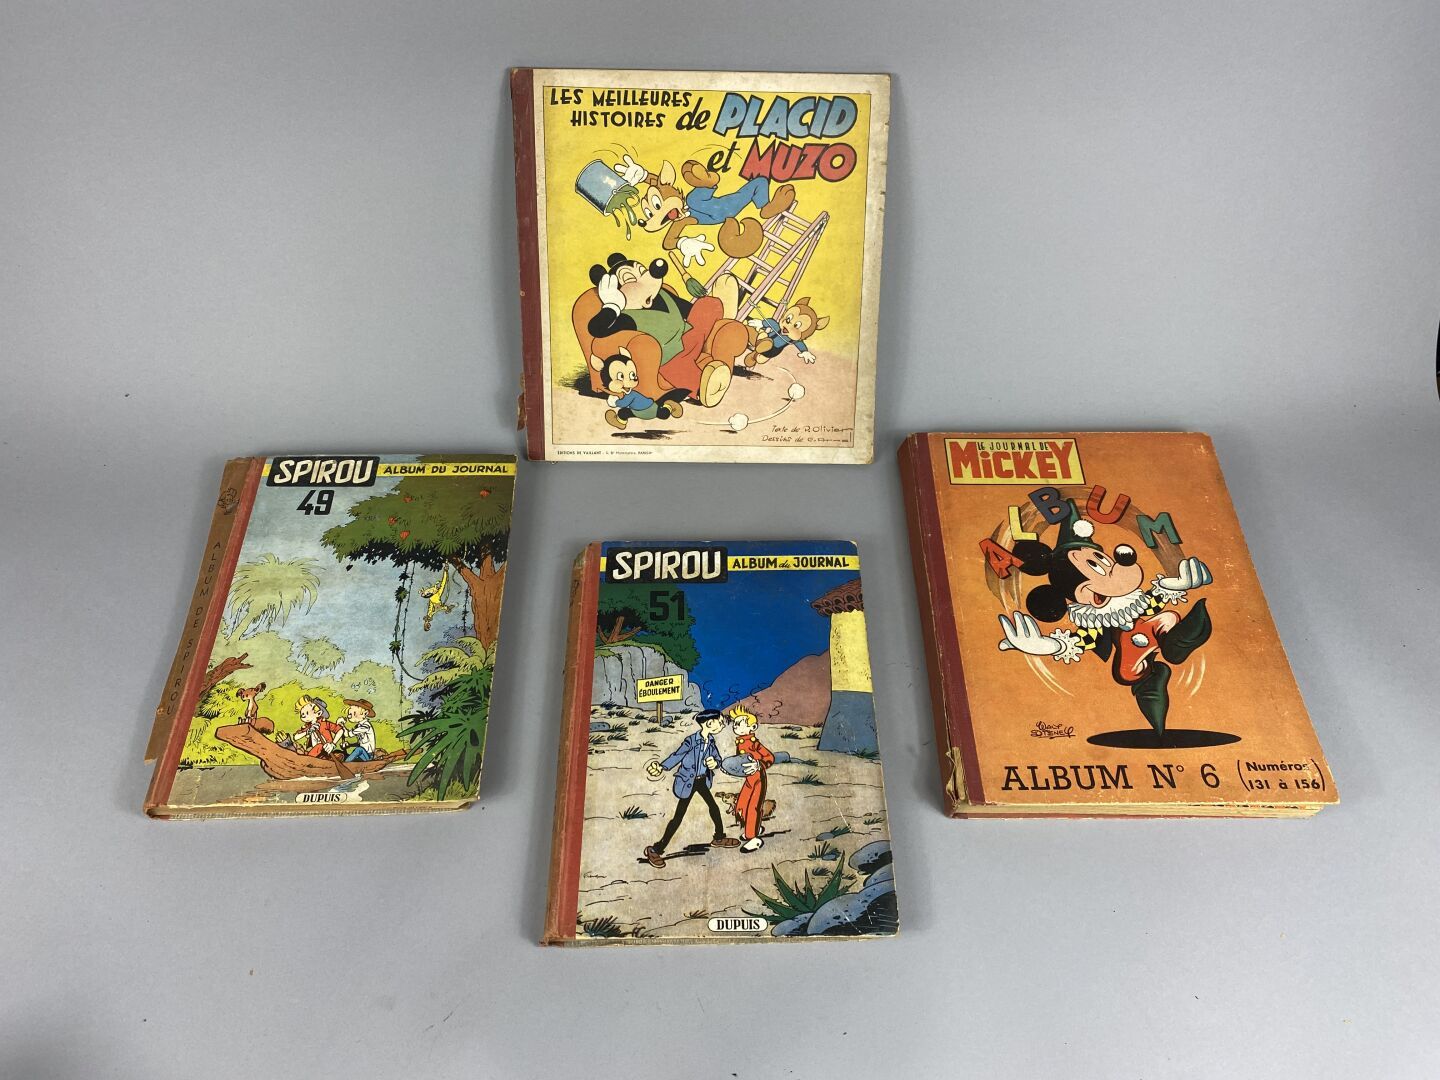 Null Lot including : 

Two albums of Spirou 1954.

A Journal de Mickey.

An albu&hellip;